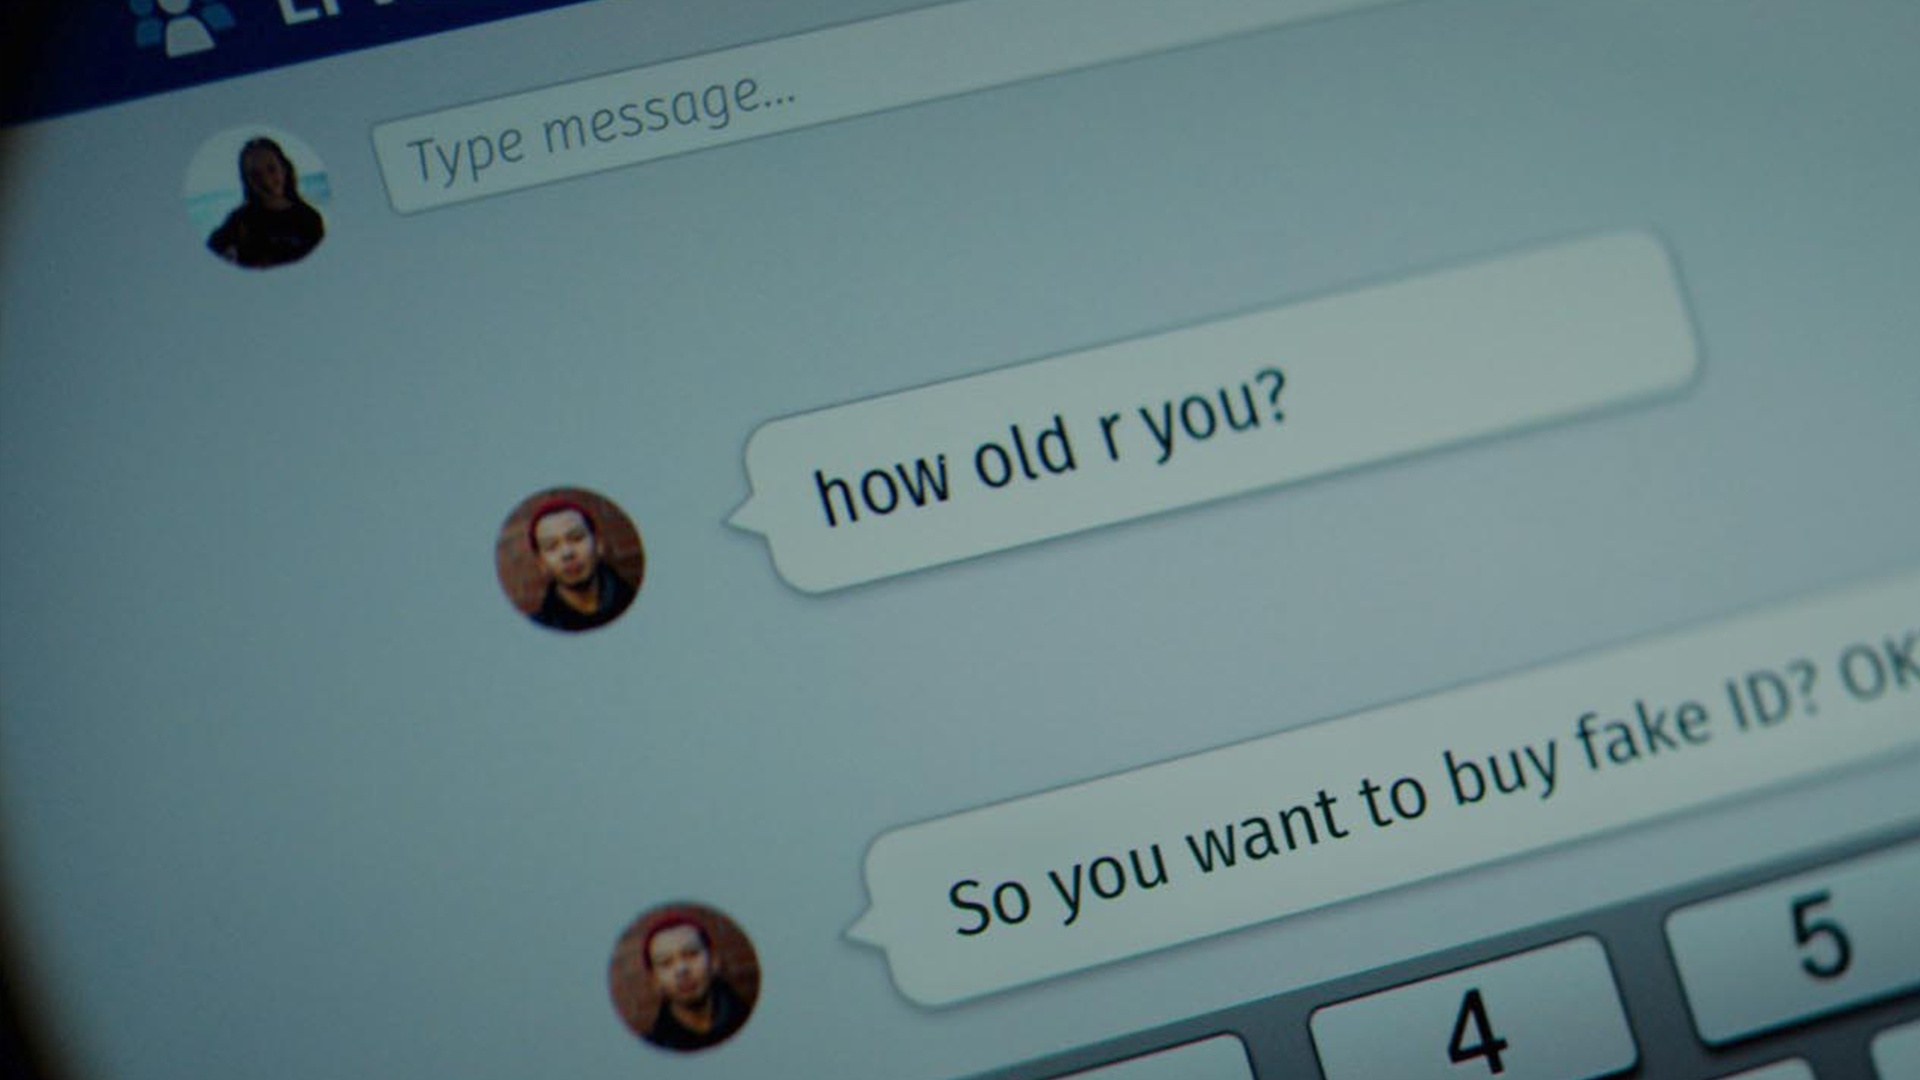 A mobile phone messaging screen reading "How old are you? So you want to buy a fake ID?"